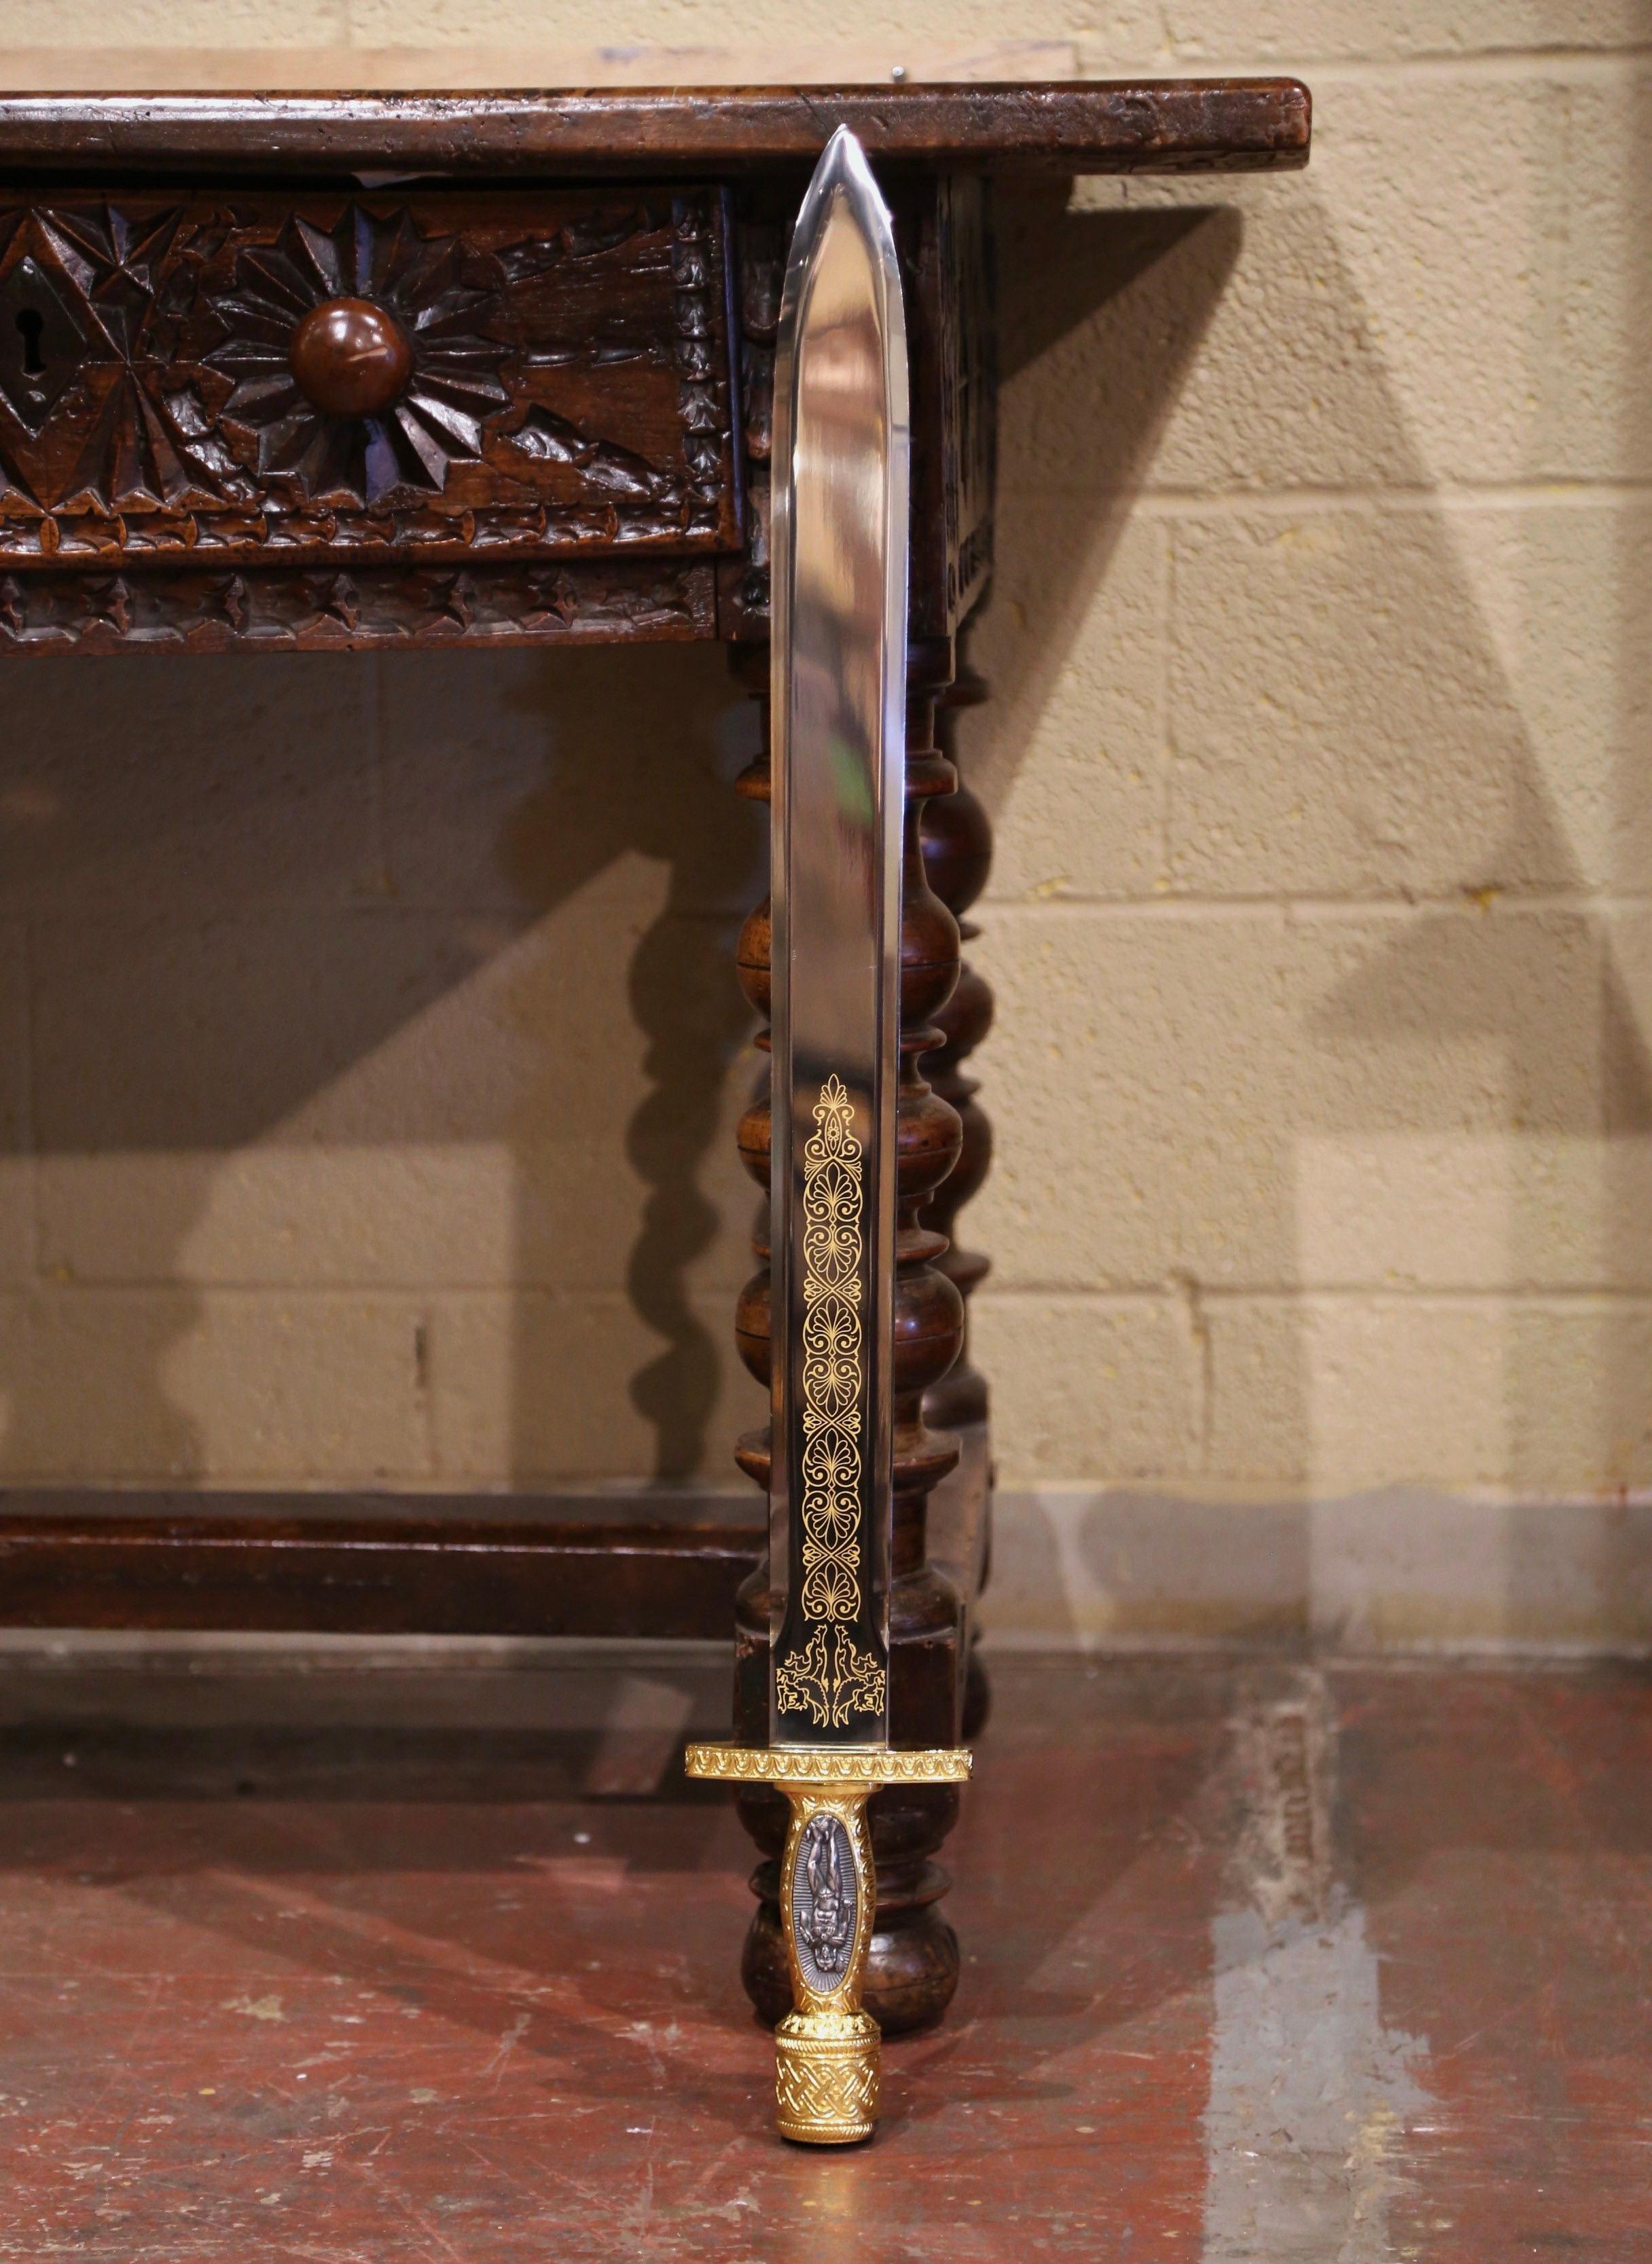 Greek Polished Xiphos Steel Battle Sword with Gilt Hilt In Excellent Condition For Sale In Dallas, TX